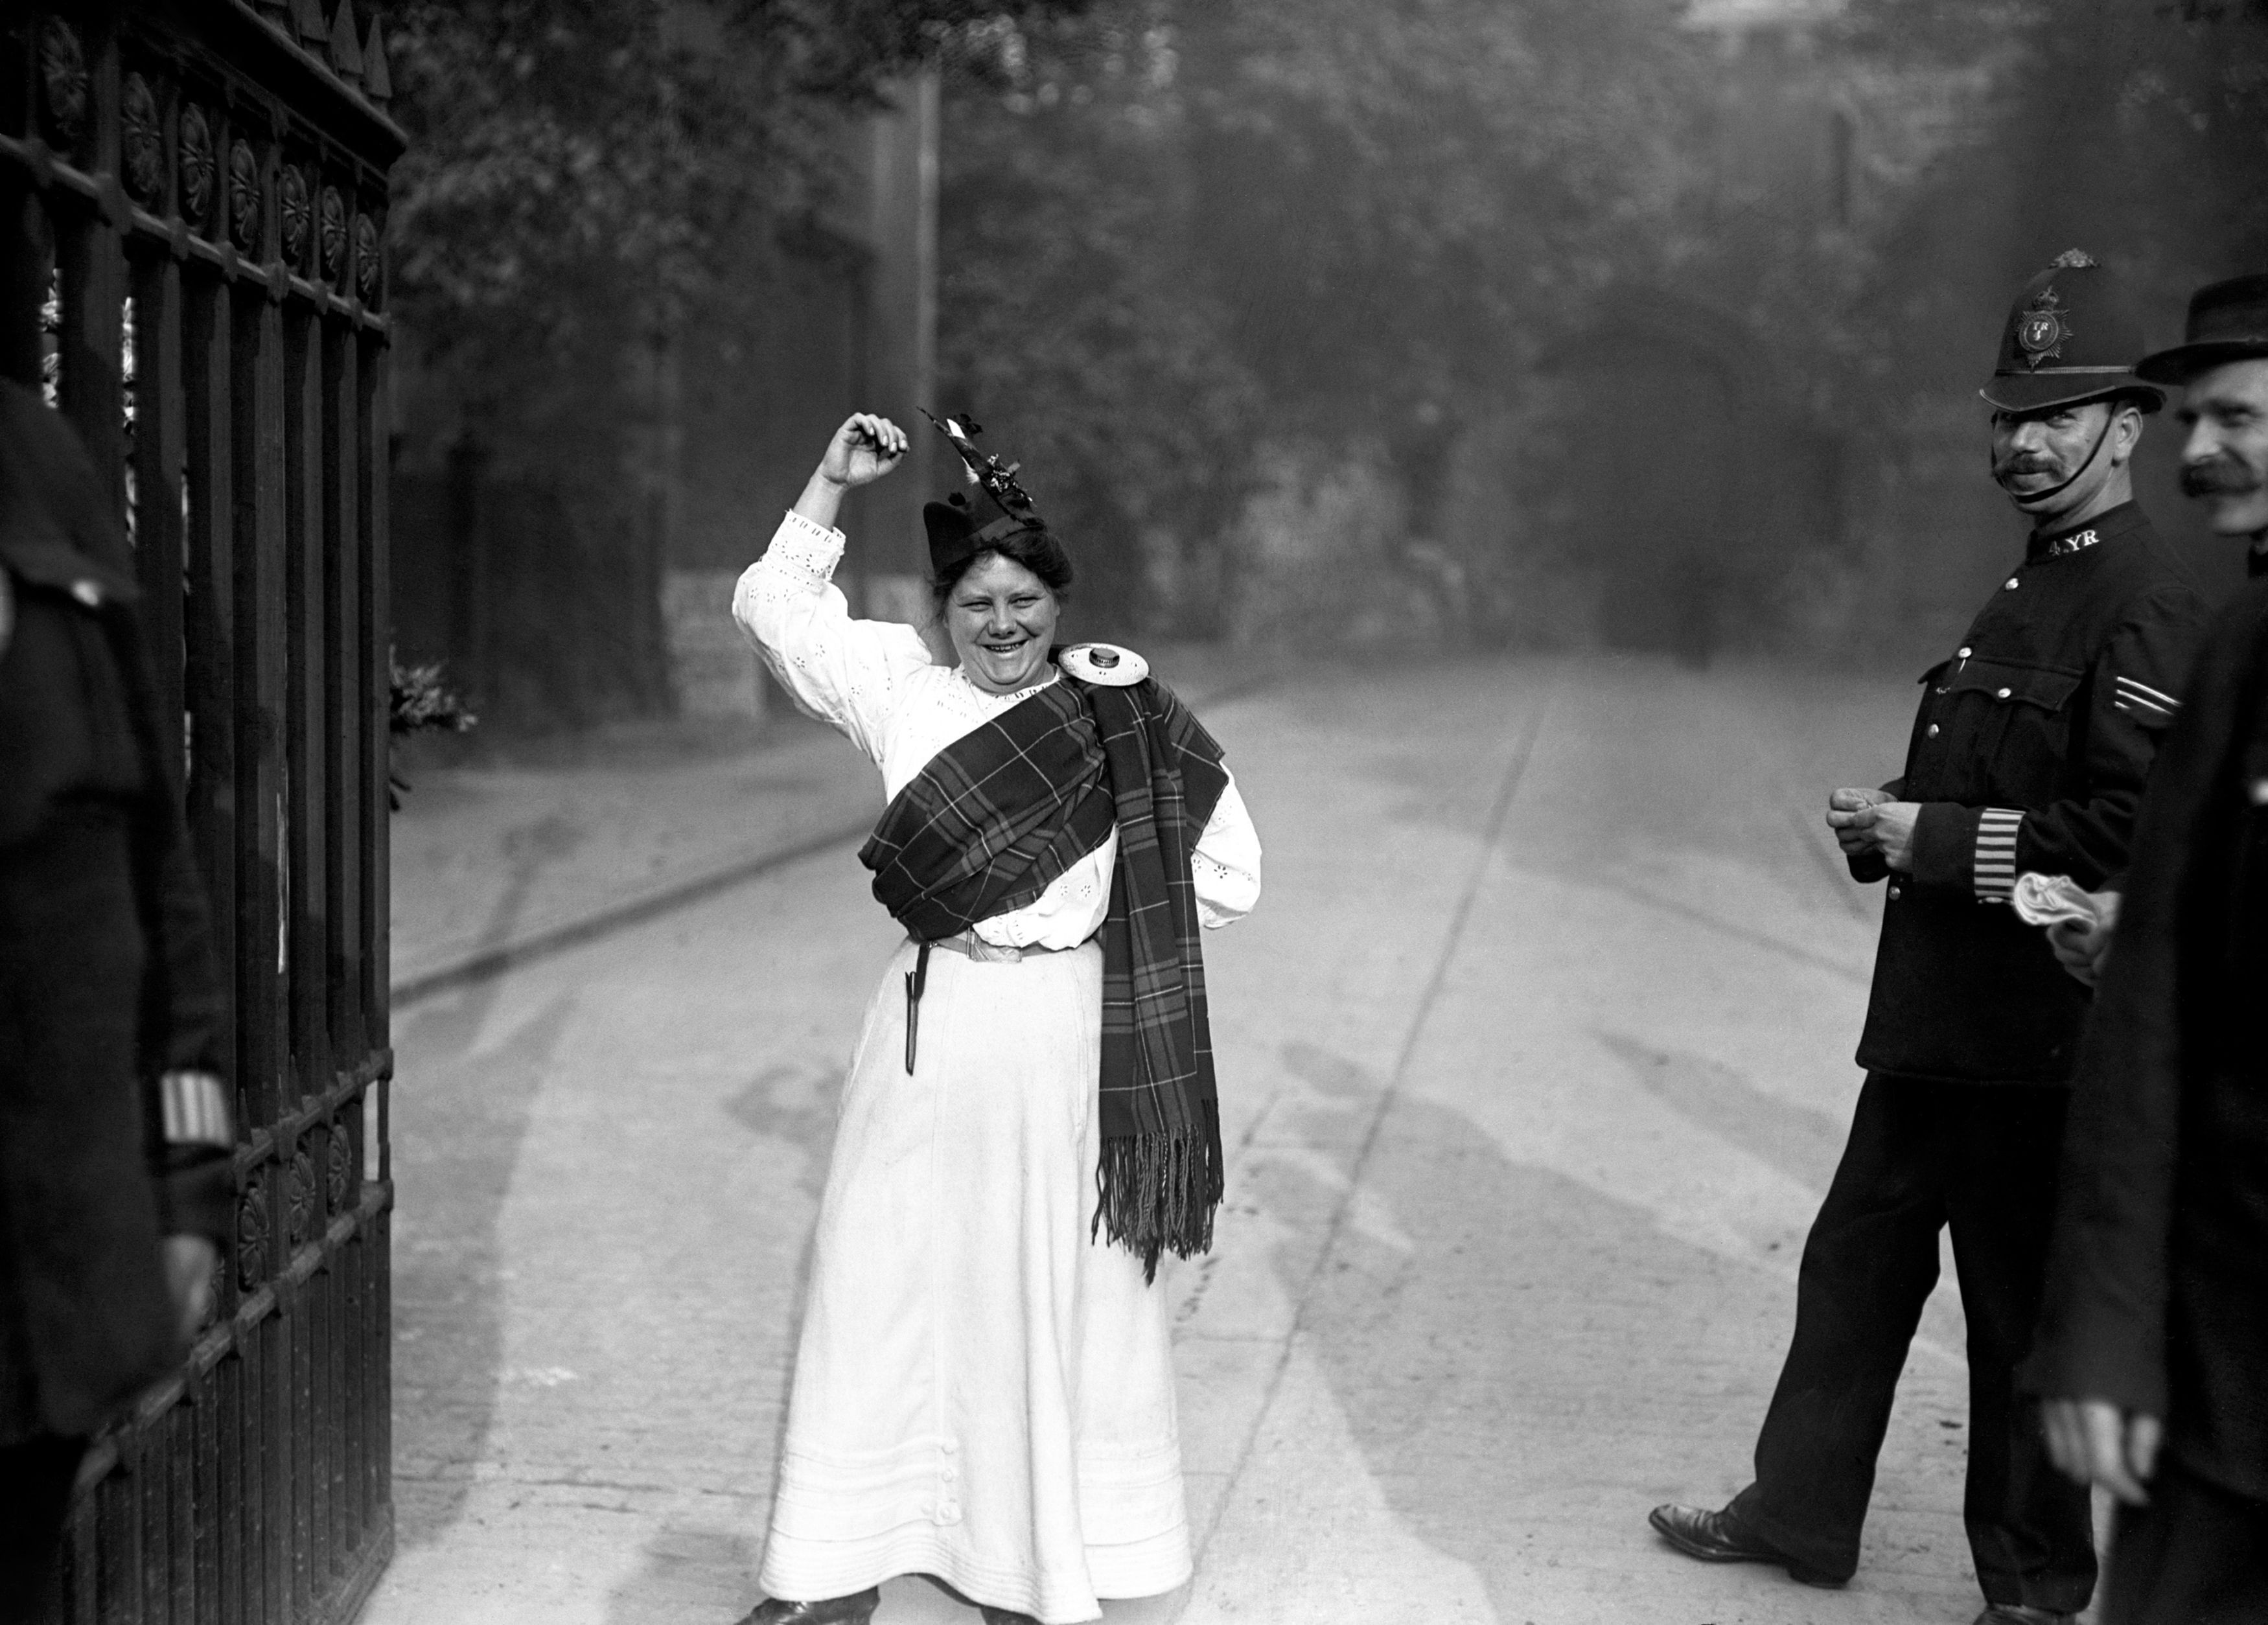 Manchester-born Flora Drummond, who was known for dramatic stunts, a militant attitude to suffrage, and rallying speeches (PA)